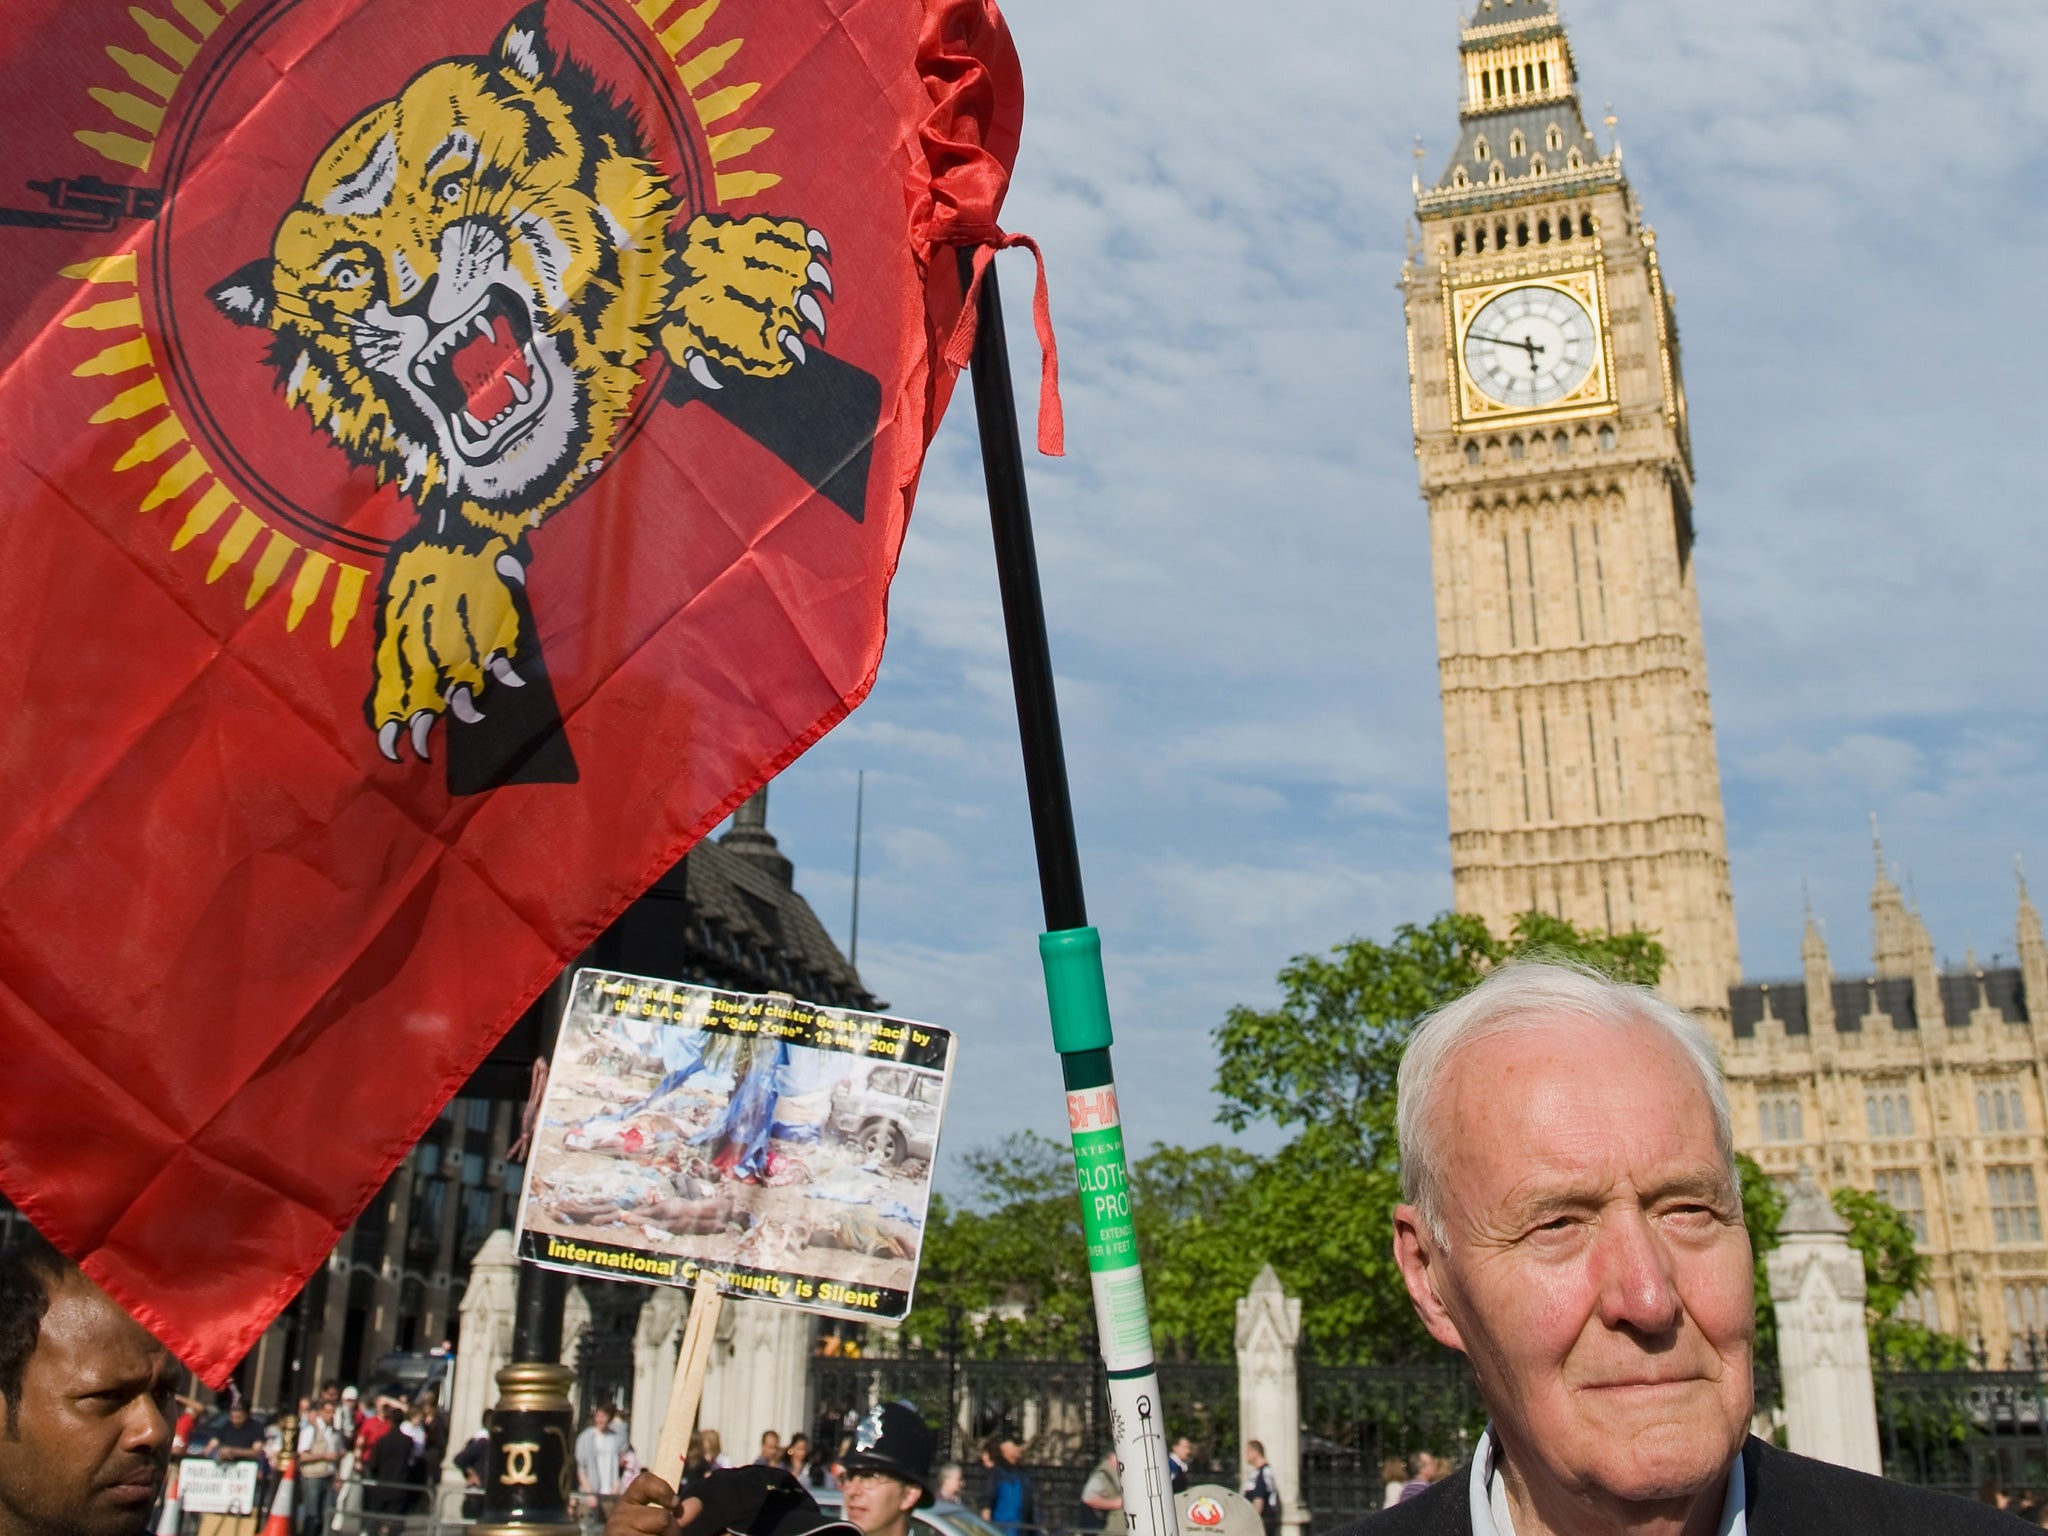 May 2009: Tony Benn attends a vigil organized by Tamil Students in Parliament Square, held the vigil to remember victims of the civil war in Sri Lanka